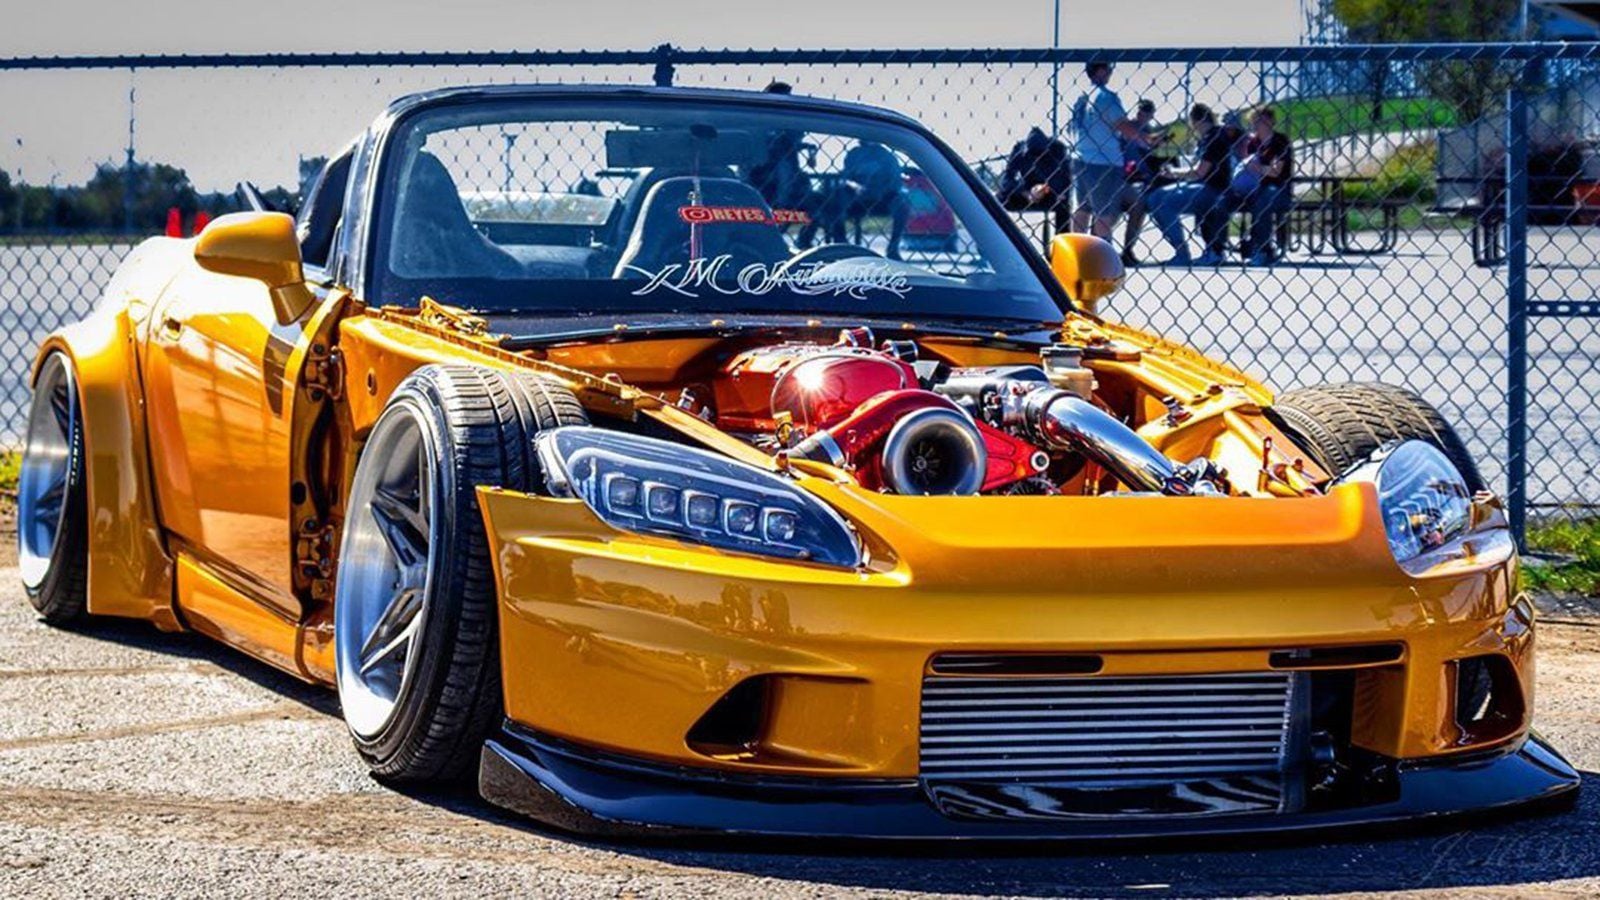 Reyes' Honda S2000 is a Build With a Message –